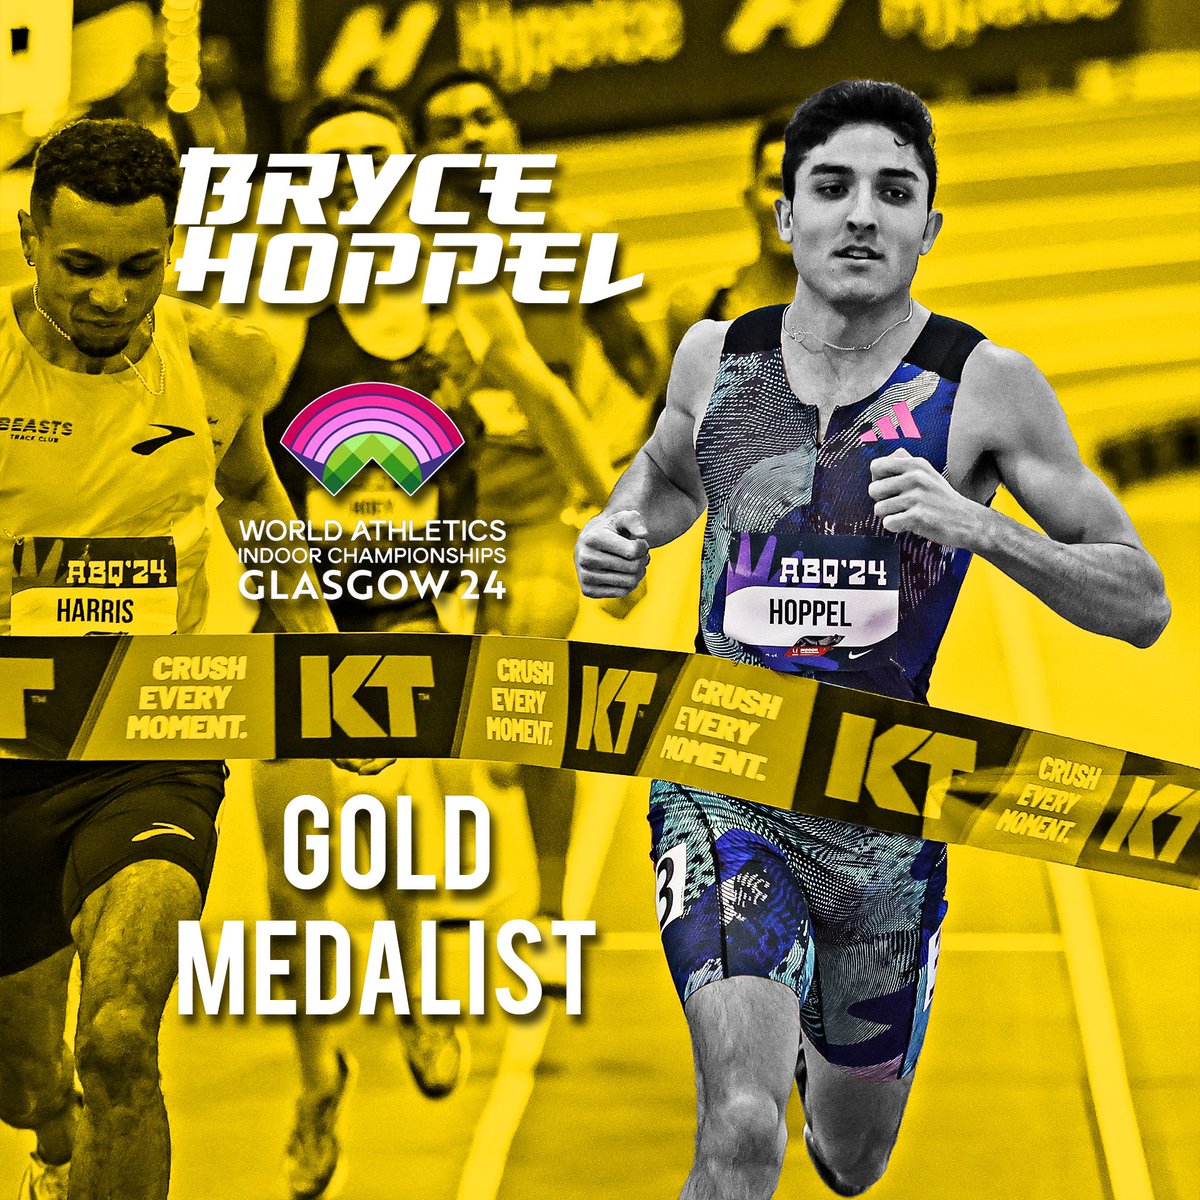 From Midland, Texas to Glasgow, Scotland — @BryceHoppel is your World Indoor Champion at 800m at @wicglasgow24 !!